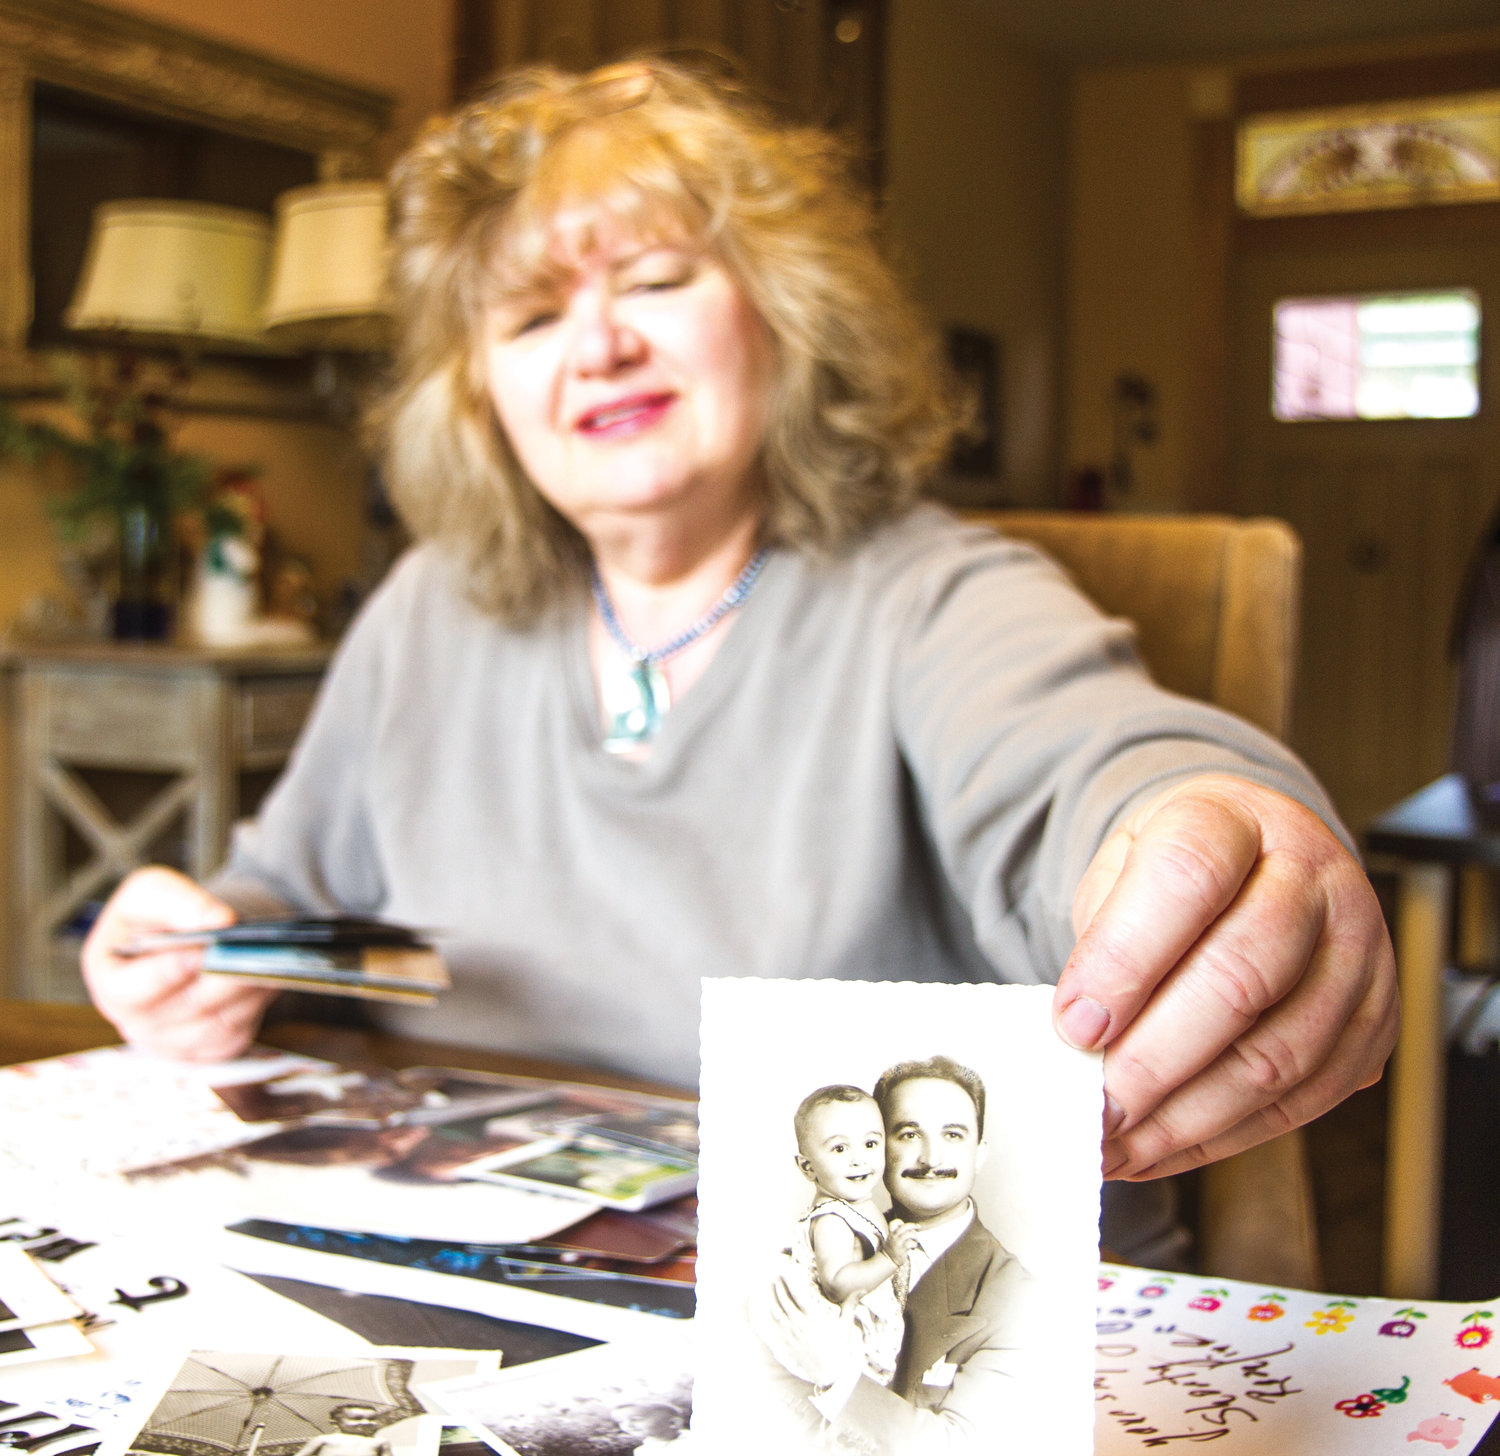 Marie Youssefirad reminisces over photos of her late husband, Fariborz Youssefirad, who died of complications from type 2 diabetes in 2014. The two met in college in California in the 1970s and were married in 1978. They were inseparable, she said, adding they never had kids but had plenty of fun during their time together.